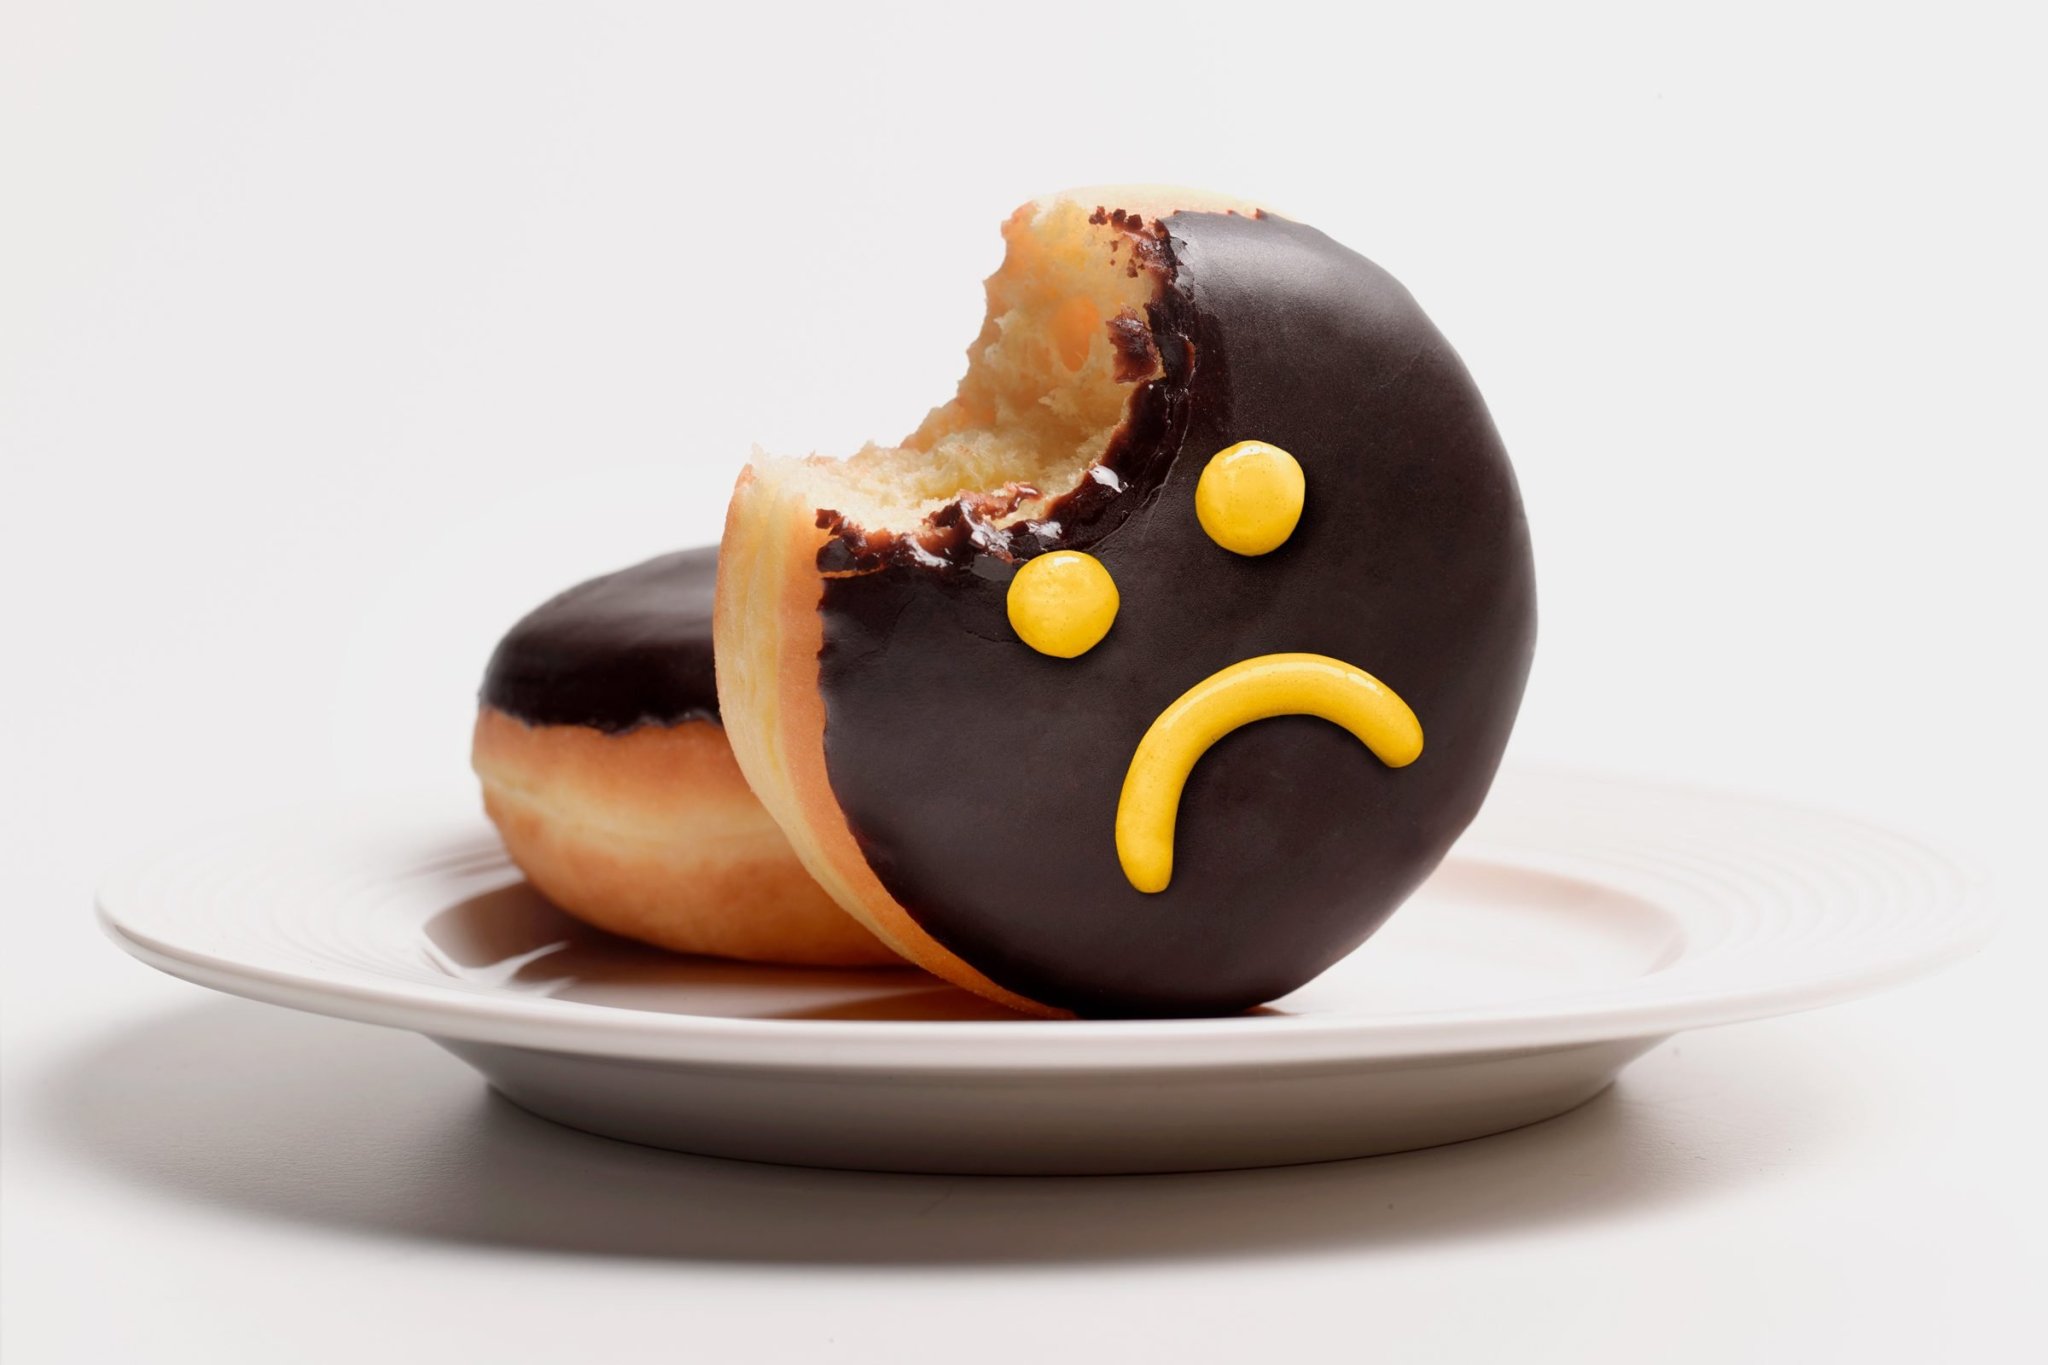 This One Emotion Is Worse for Your Health Than Junk Food, According to a Leading Functional Medicine Doctor